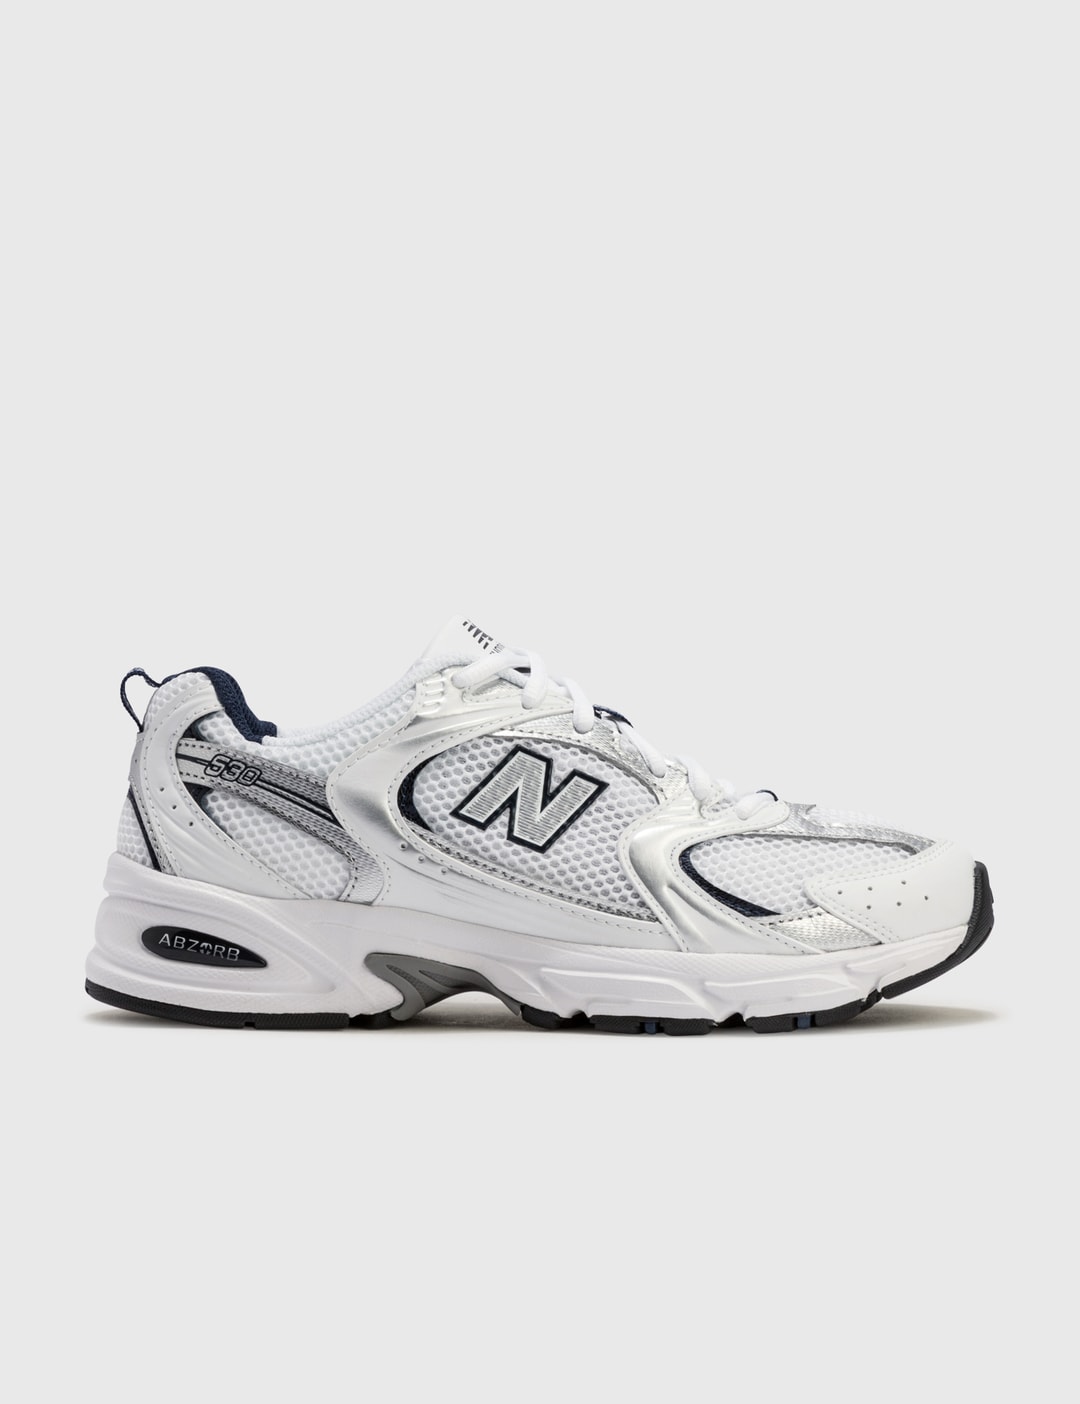 New Balance - 530 Sneaker | HBX - Globally Curated Fashion and ...